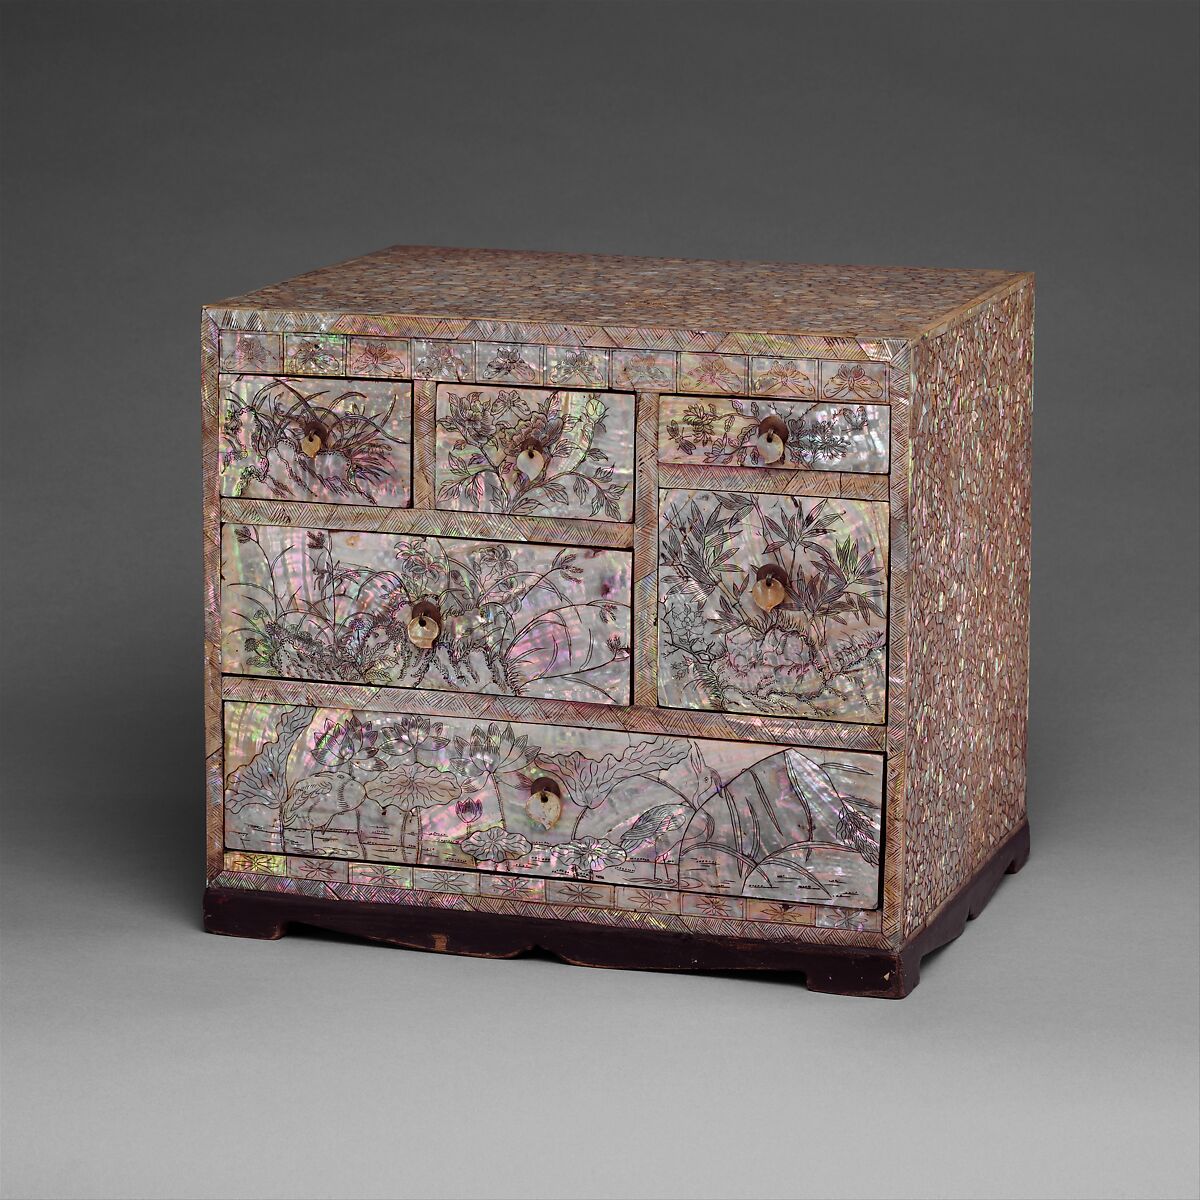 Small chest of drawers decorated with flowers, birds, and insects

, Lacquer inlaid with mother-of-pearl, with incised design, Korea